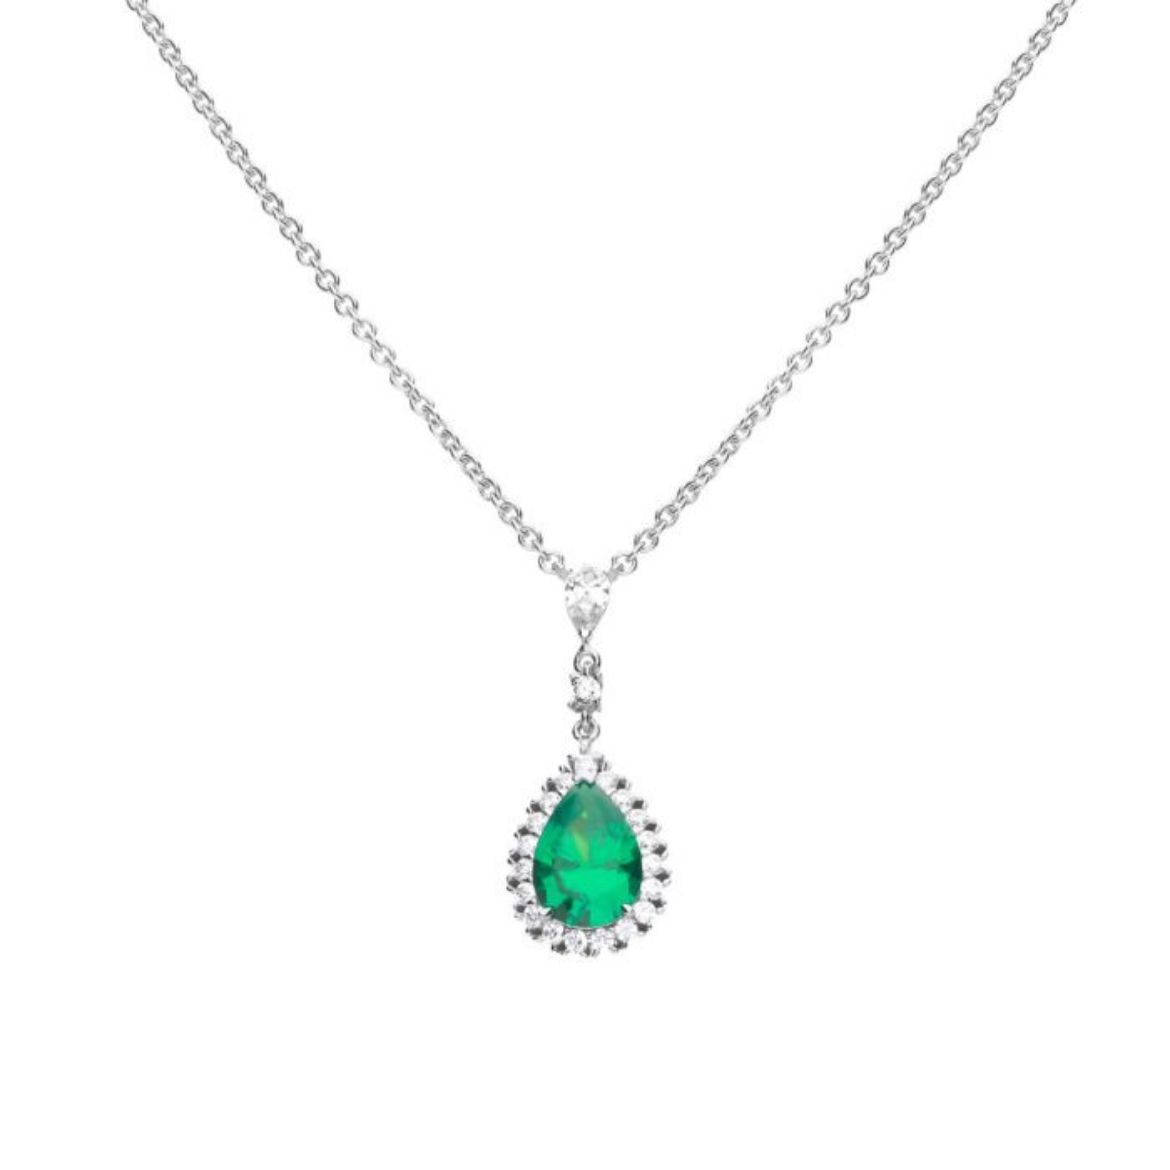 Picture of Emerald Teardrop and Pave Surround Necklace